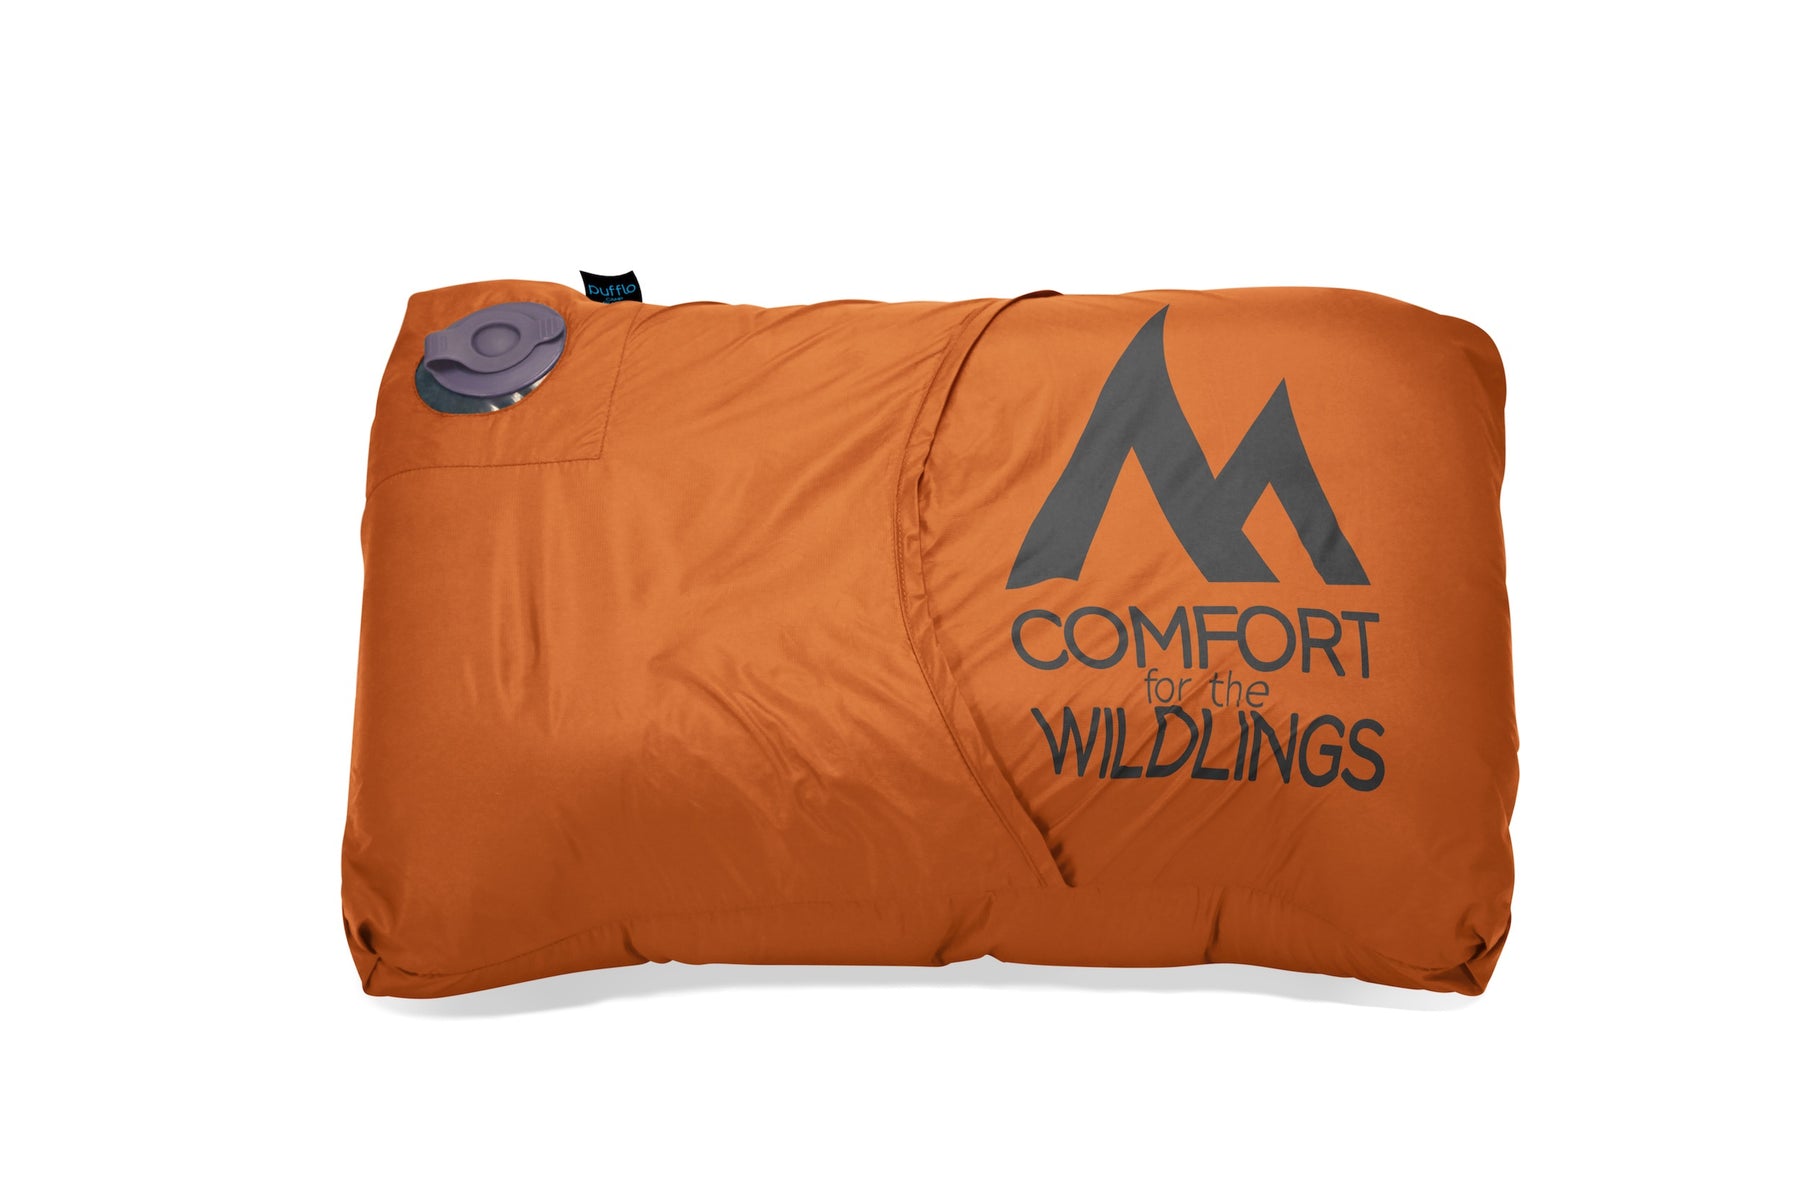 Foxelli Camping Pillow for Sleeping – Compressible Foam Camp Pillow